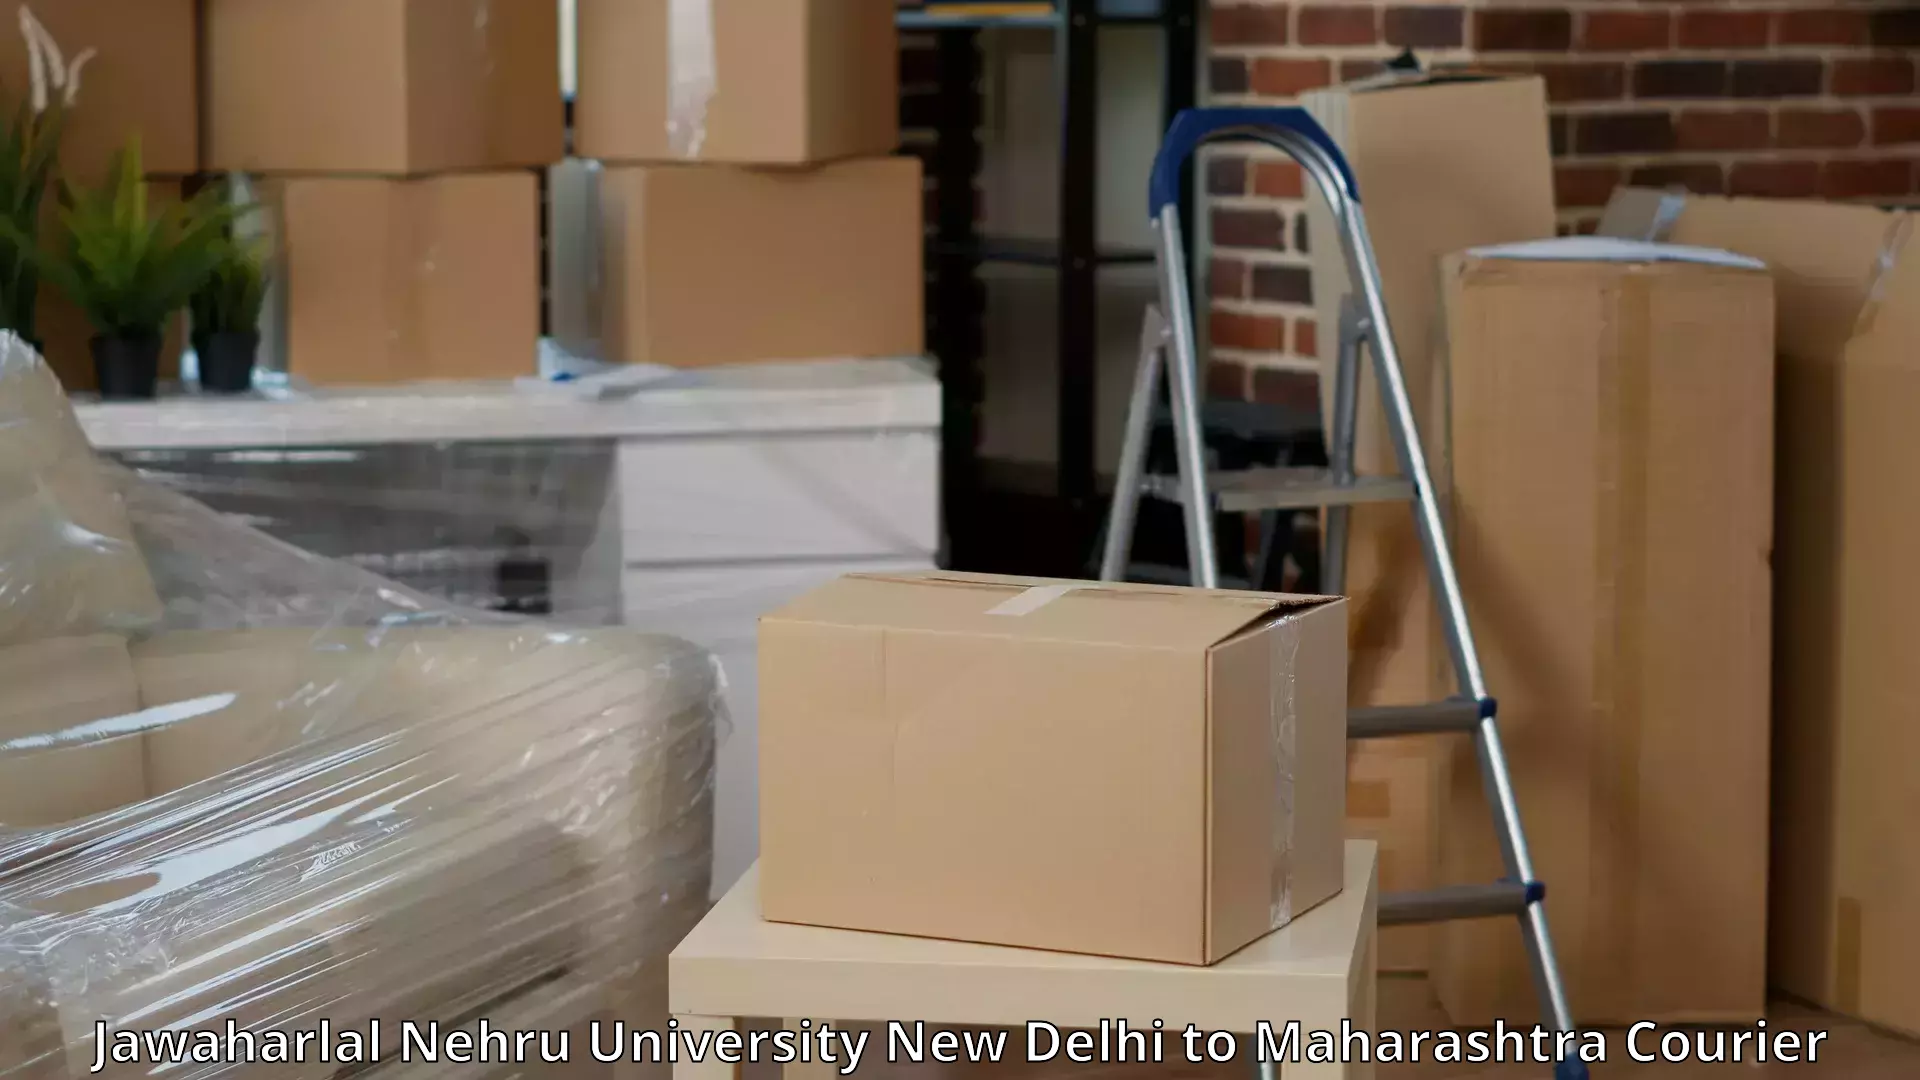 Quality relocation services in Jawaharlal Nehru University New Delhi to Akluj